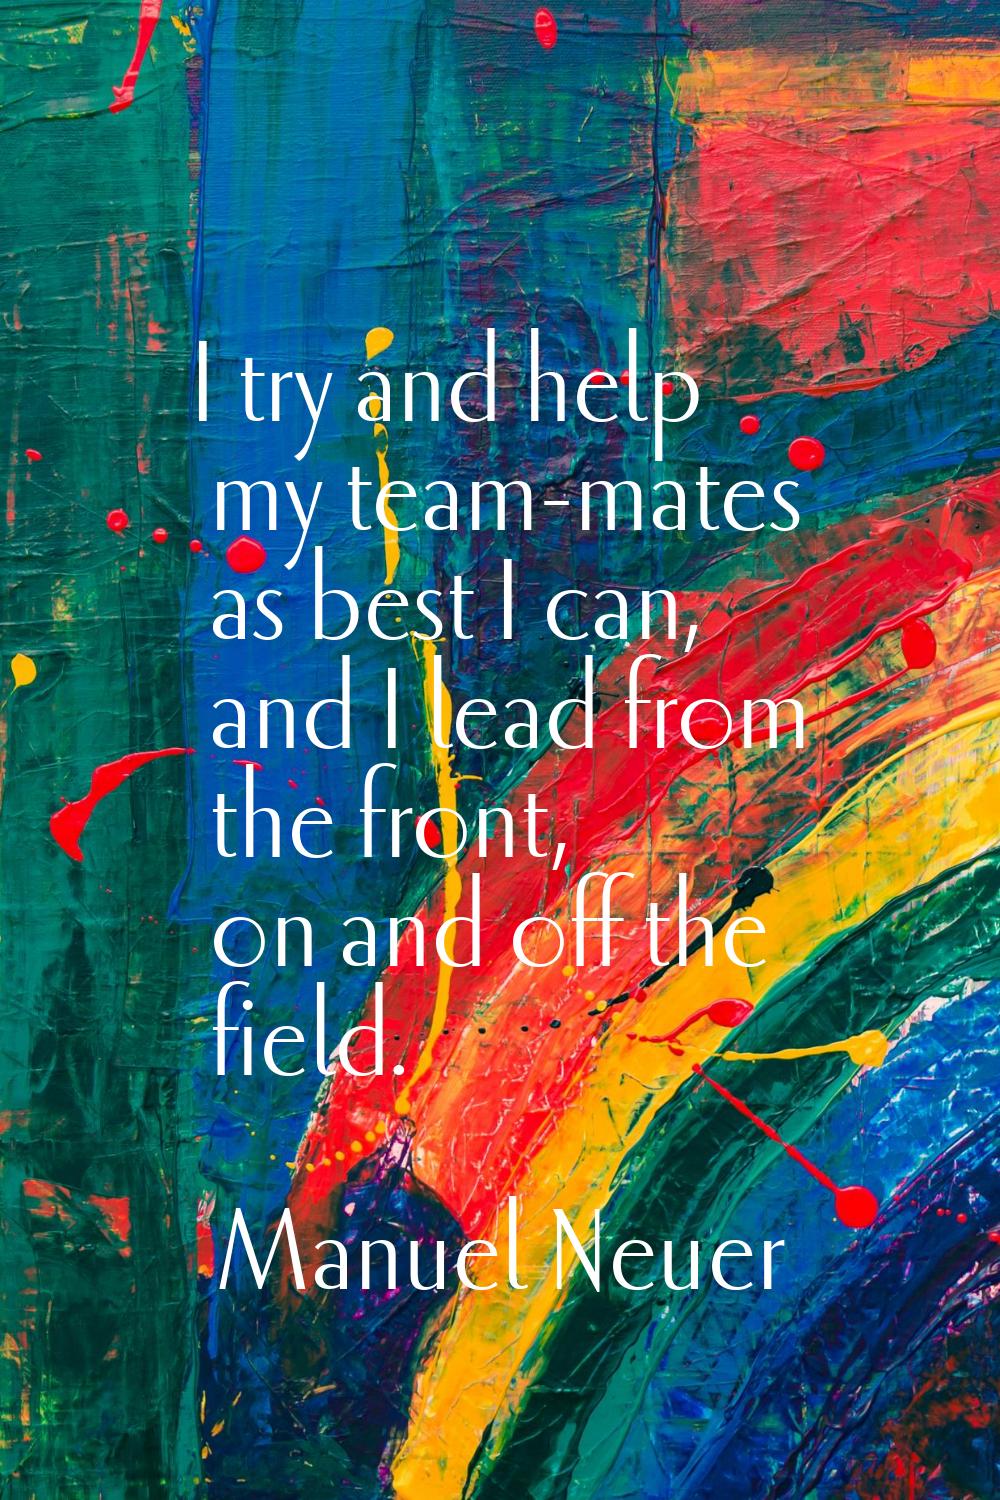 I try and help my team-mates as best I can, and I lead from the front, on and off the field.